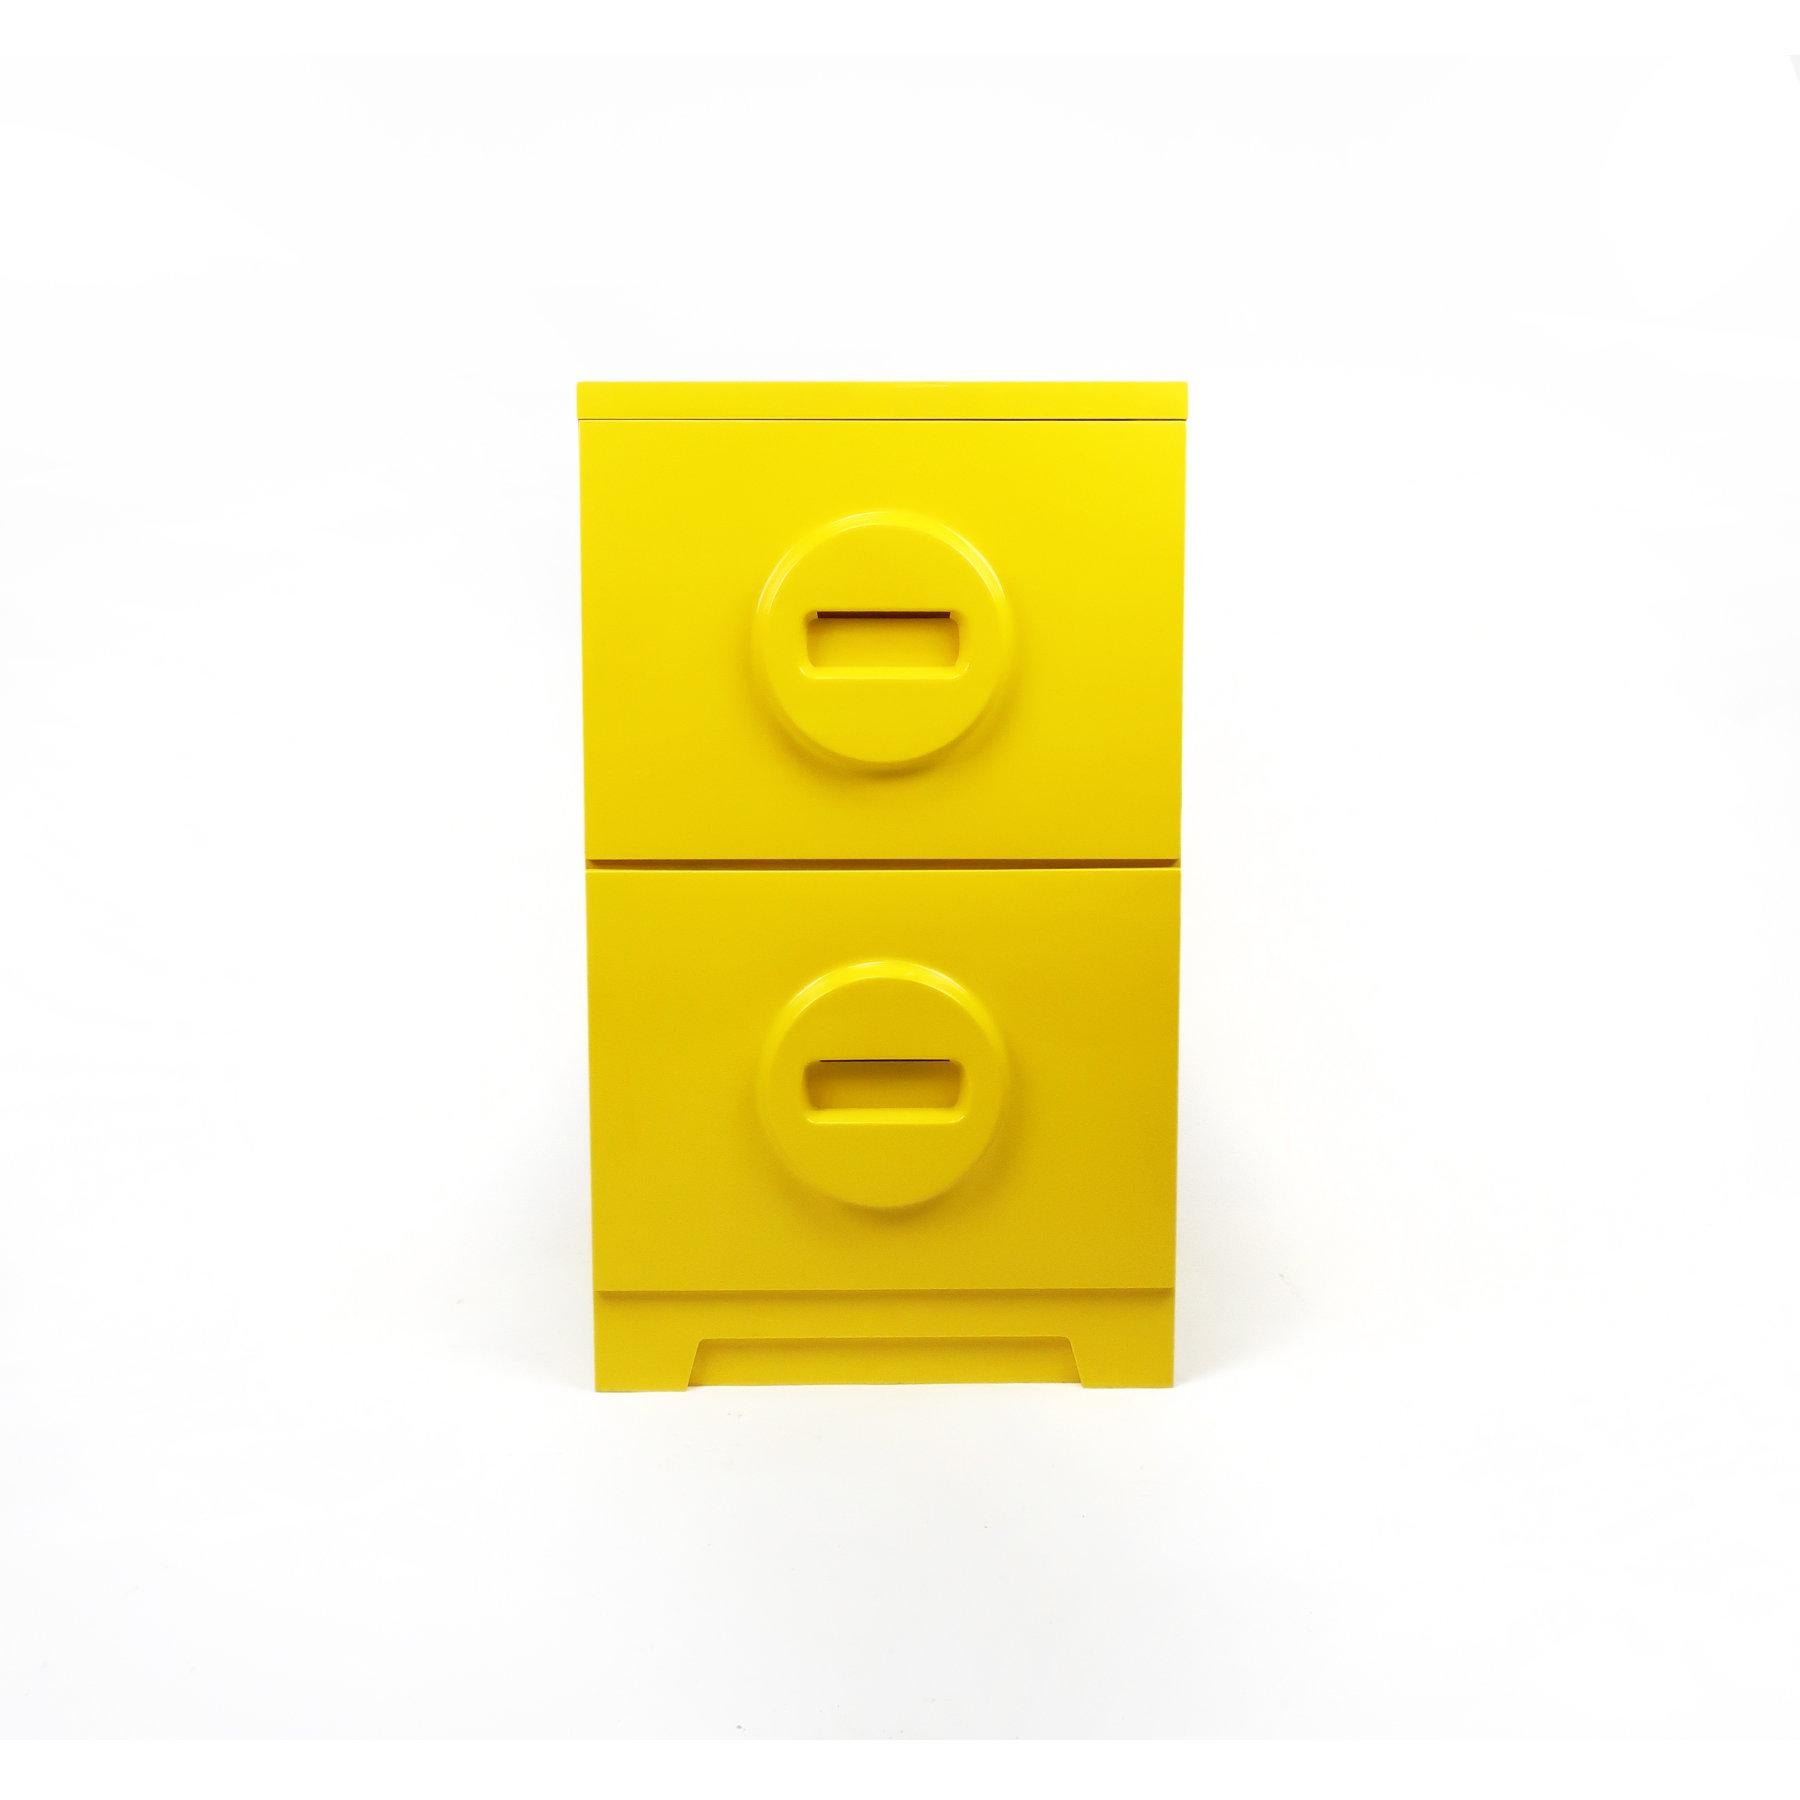 File in style with a stunning 1970s Akro-Mils plastic filing cabinet in bright yellow. Two drawers with a cool Lego-esque handle on each. Get organizing with this amazing mid-century modern design!
 
 In excellent vintage condition. Slight